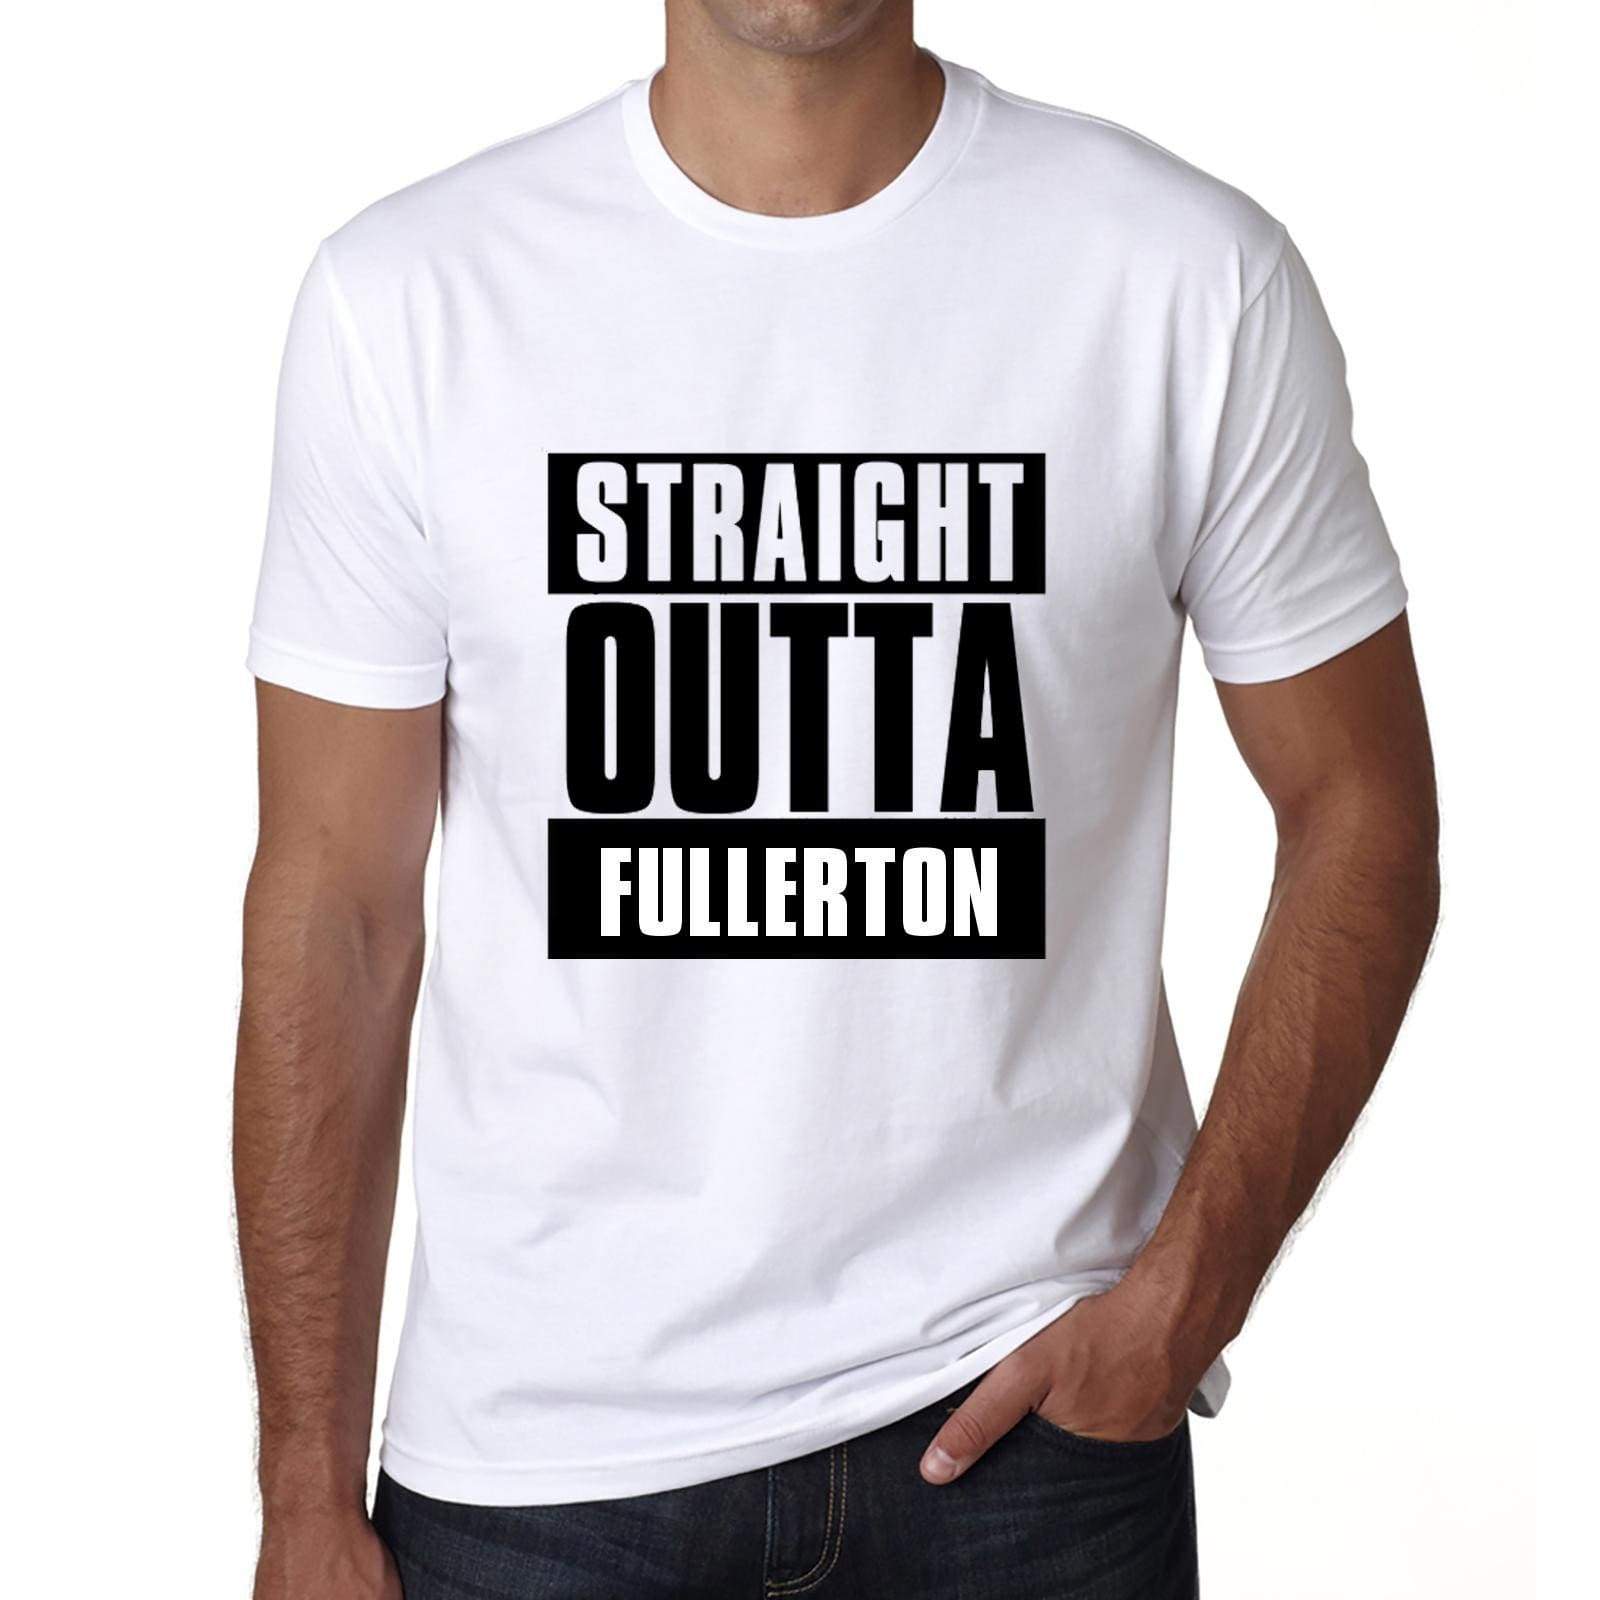 Straight Outta Fullerton Mens Short Sleeve Round Neck T-Shirt 00027 - White / S - Casual